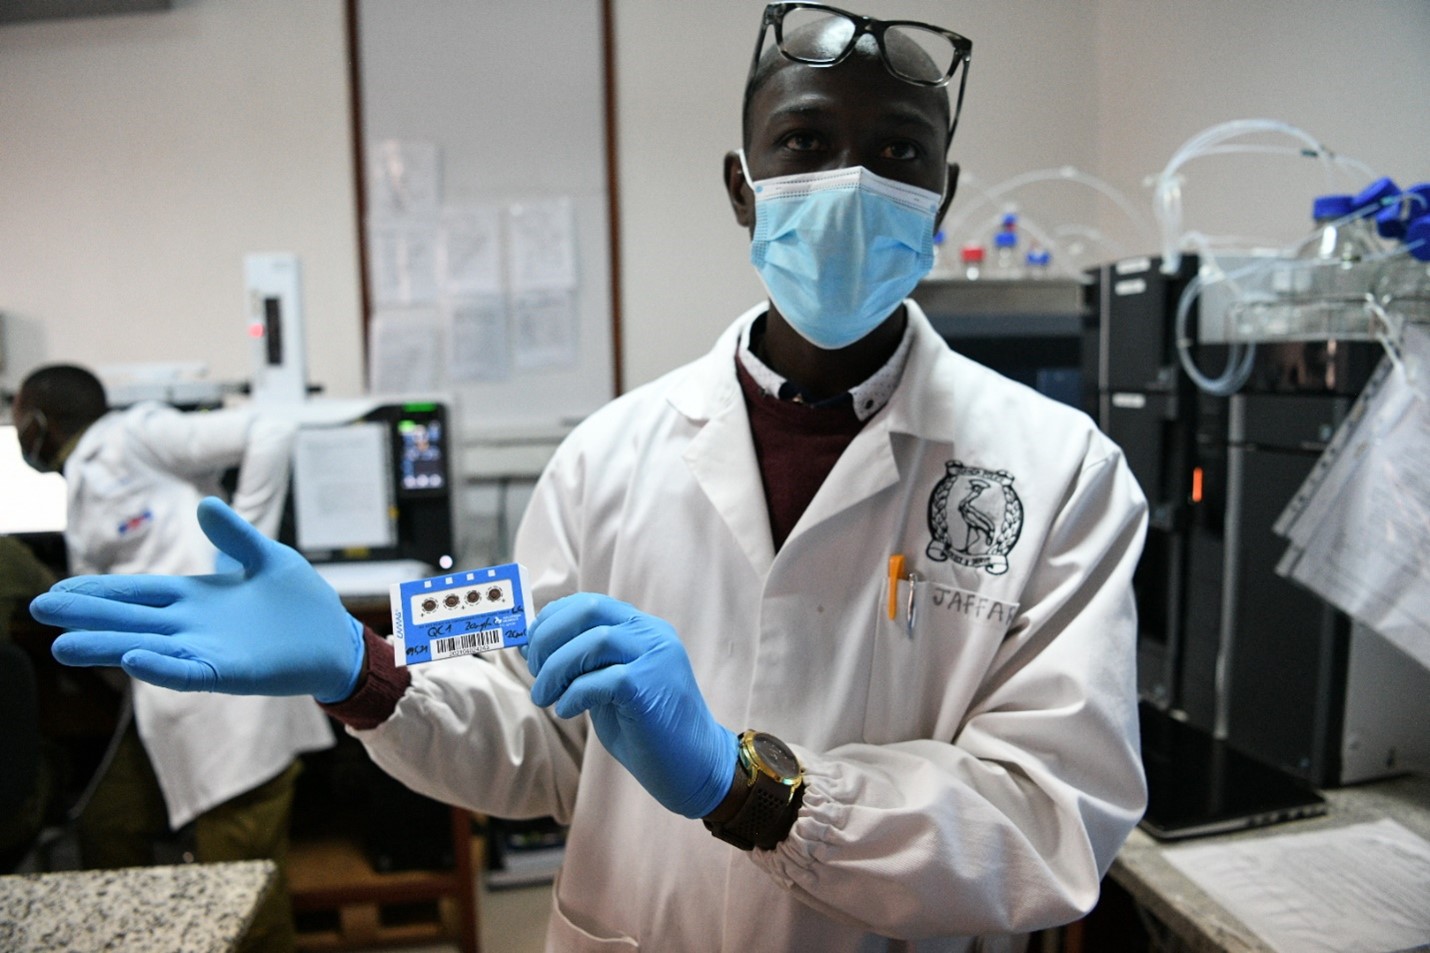 Doctor Jaffar Kisitu (Forensic Chemistry Section Head) is one of the Specialists employed to train others at the UPF Forensics Department using his PHD in Toxicology